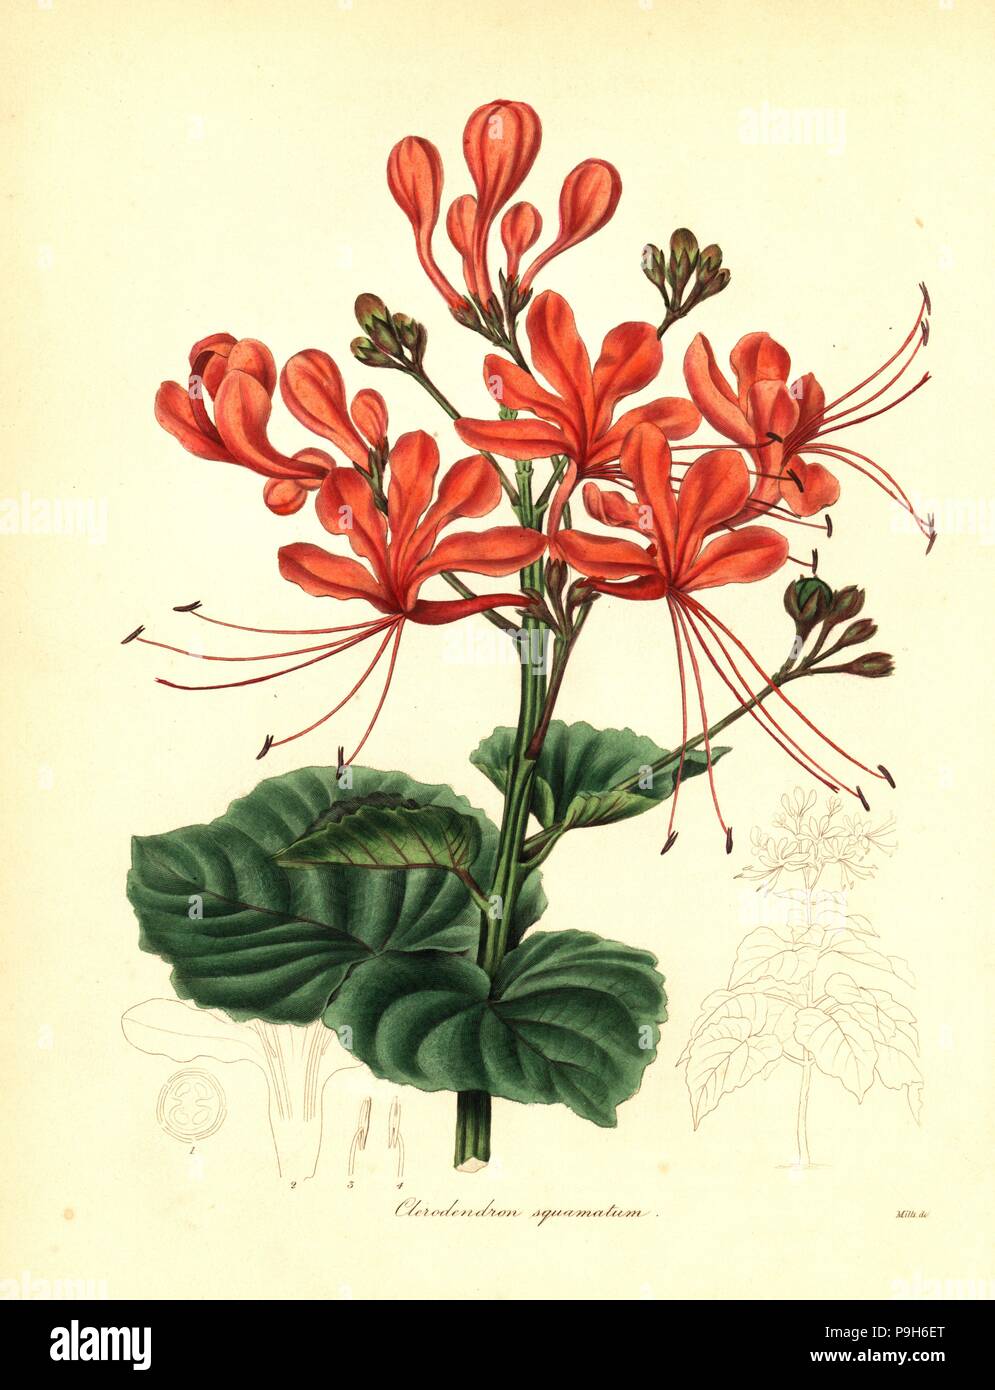 Glory bower, Clerodendrum japonicum (Scaly clerodendron, Clerodendron squamatum). Handcoloured copperplate engraving by Watts after a botanical illustration by Mills from Benjamin Maund and the Rev. John Stevens Henslow's The Botanist, London, 1836. Stock Photo